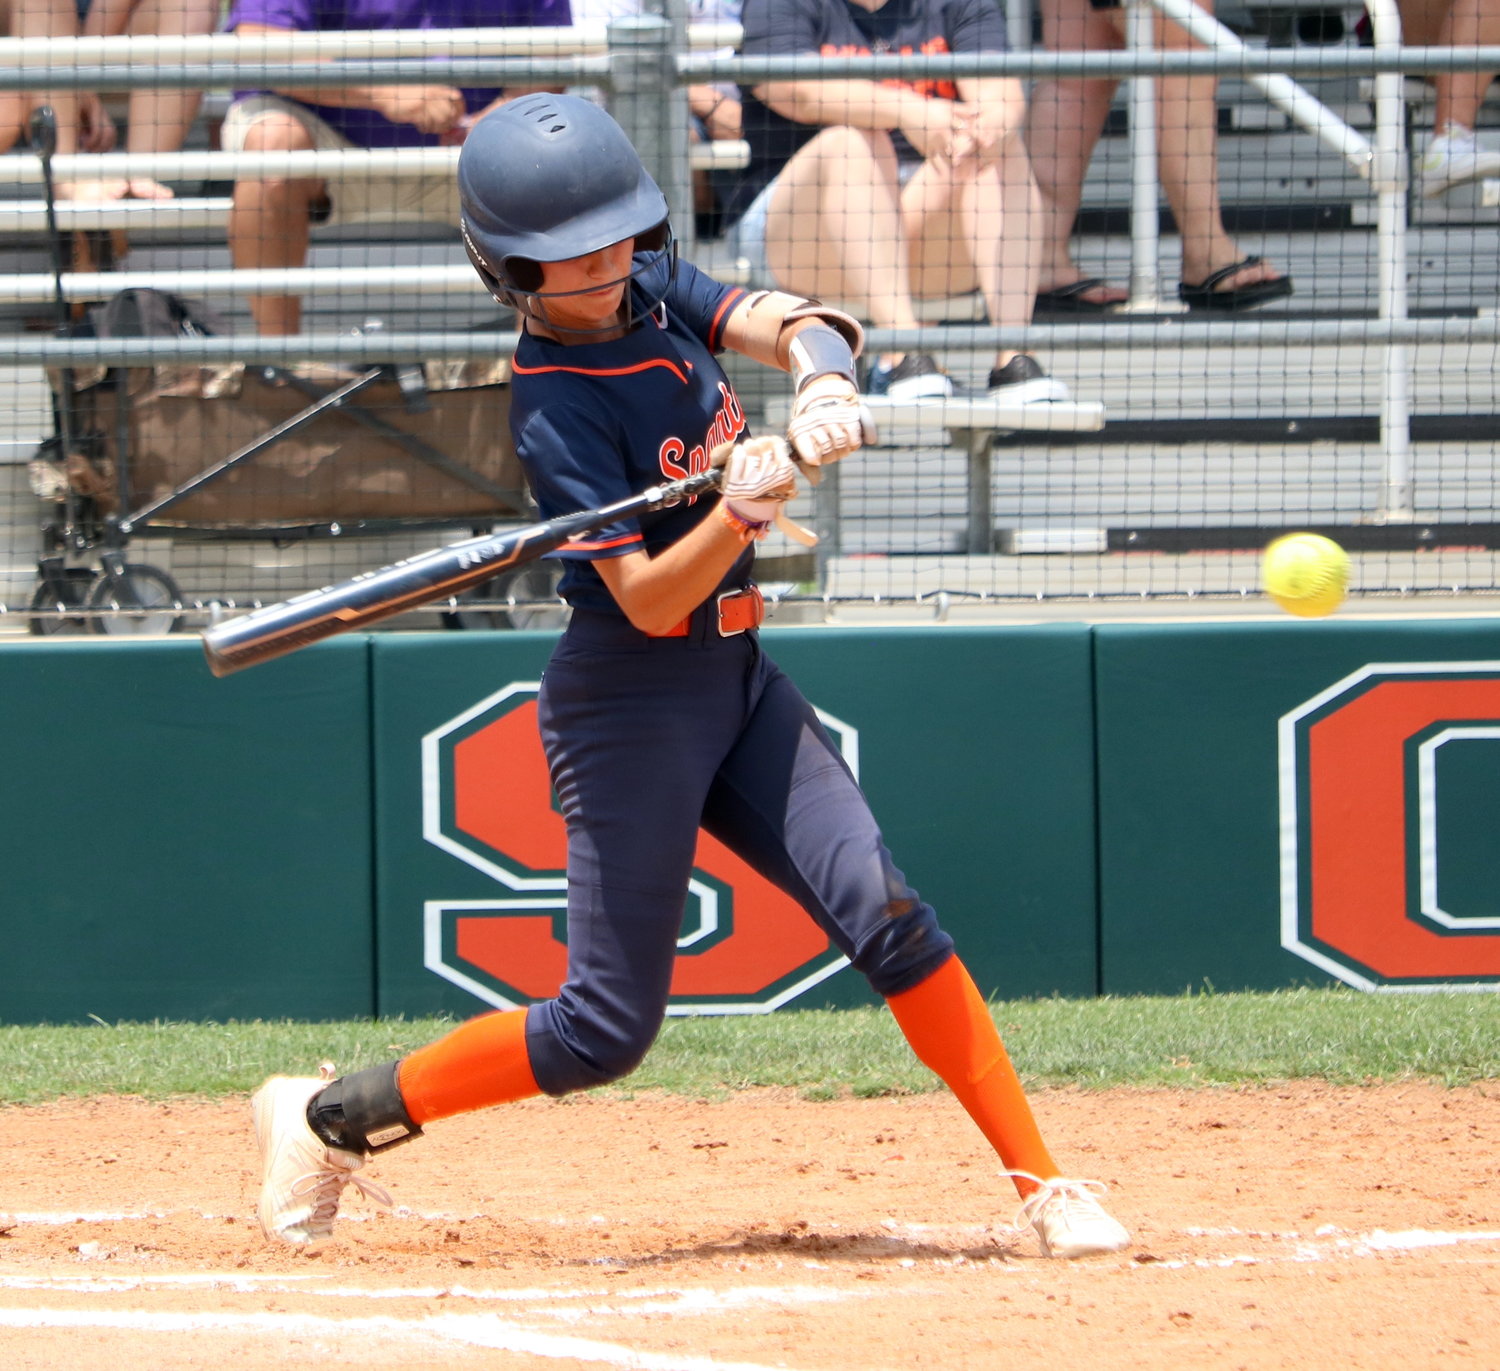 Mackinzie Stutts hits during Saturday’s area round game between Seven Lakes and Jersey Village at Seven Lakes.